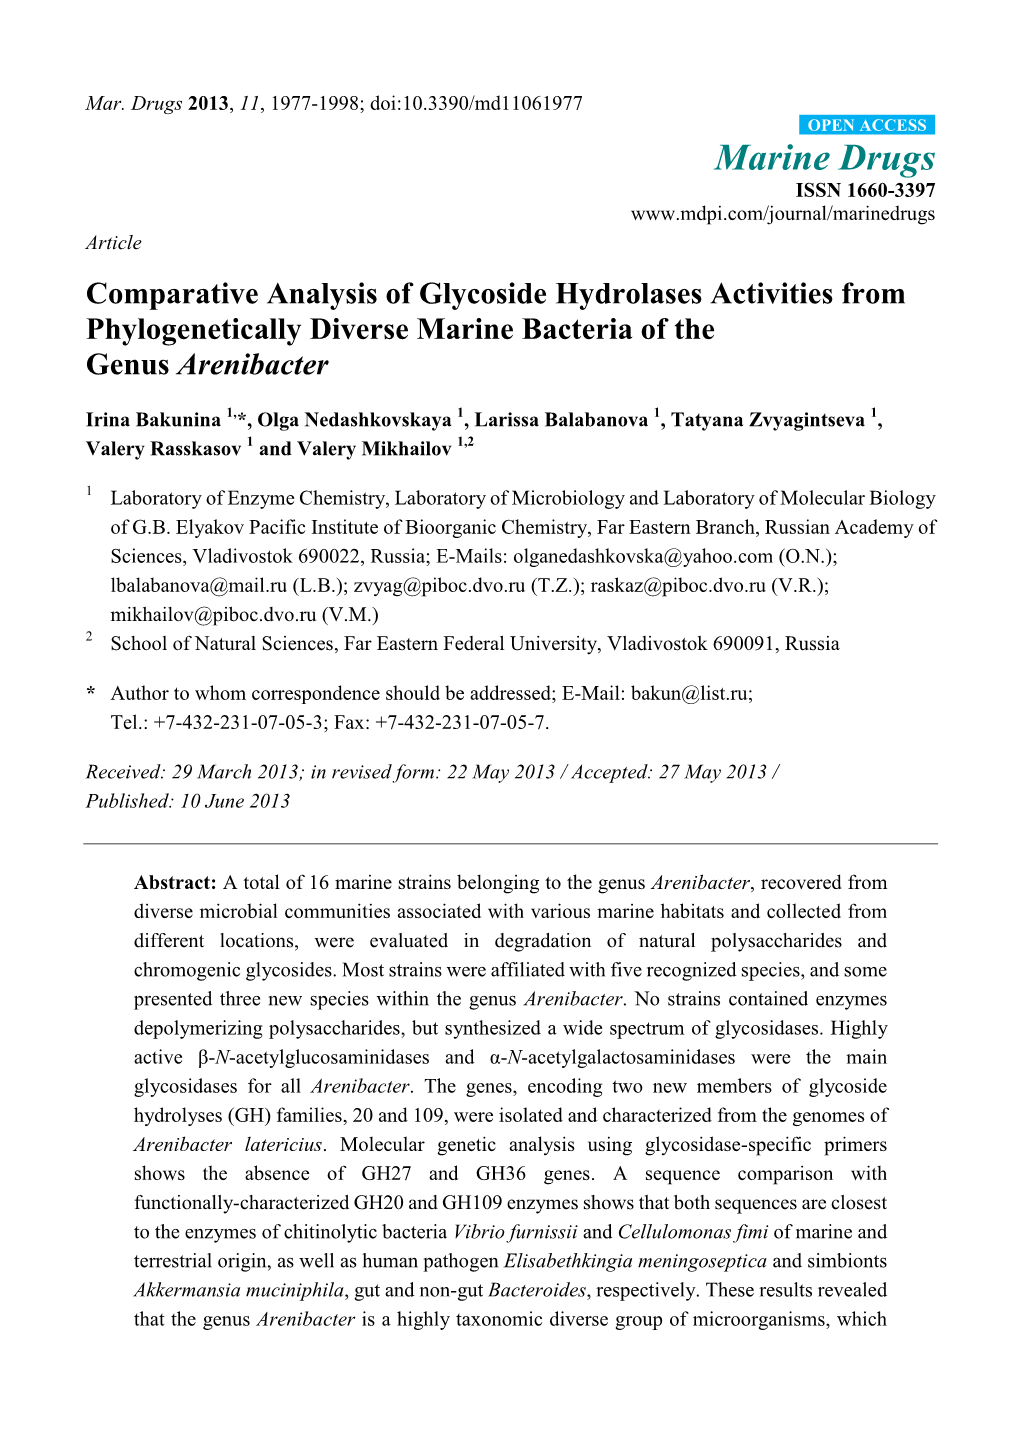 Comparative Analysis of Glycoside Hydrolases Activities from Phylogenetically Diverse Marine Bacteria of the Genus Arenibacter